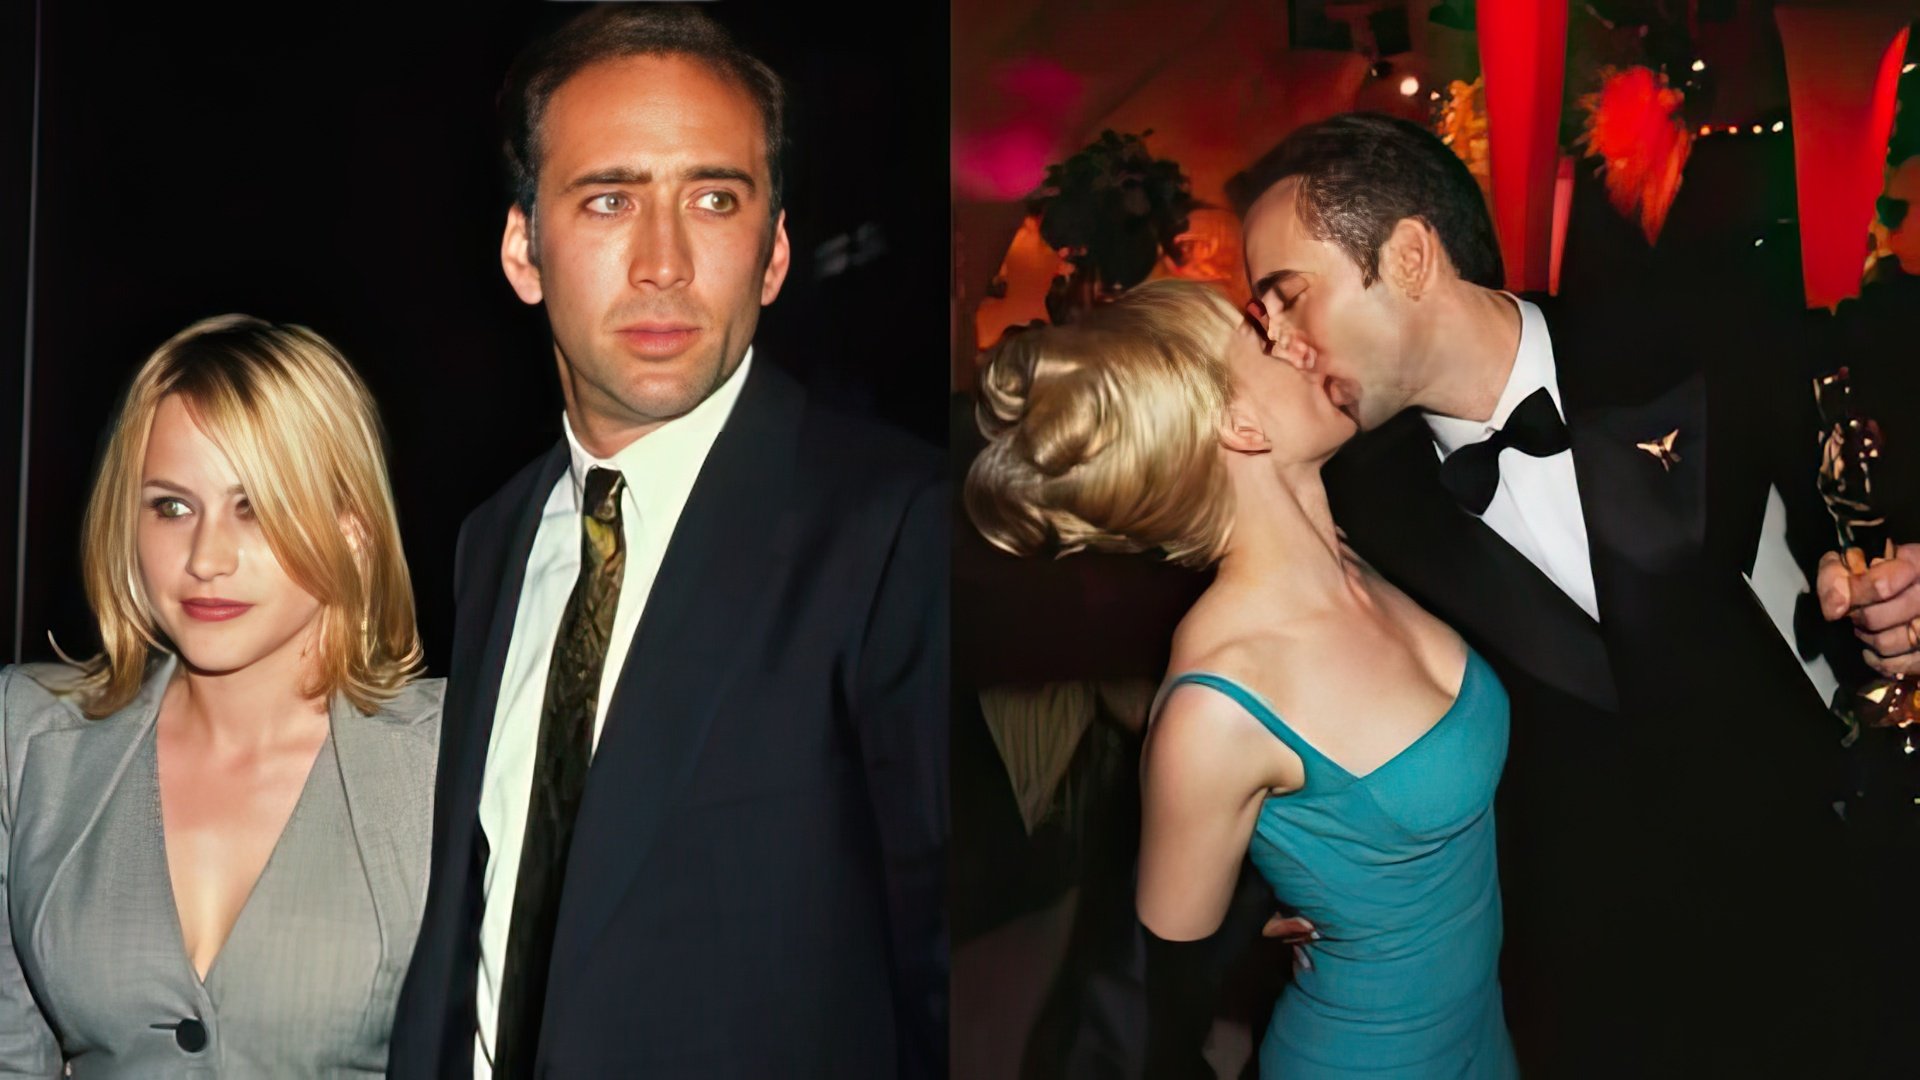 In his youth Nicolas Cage was madly in love with Patricia Arquette